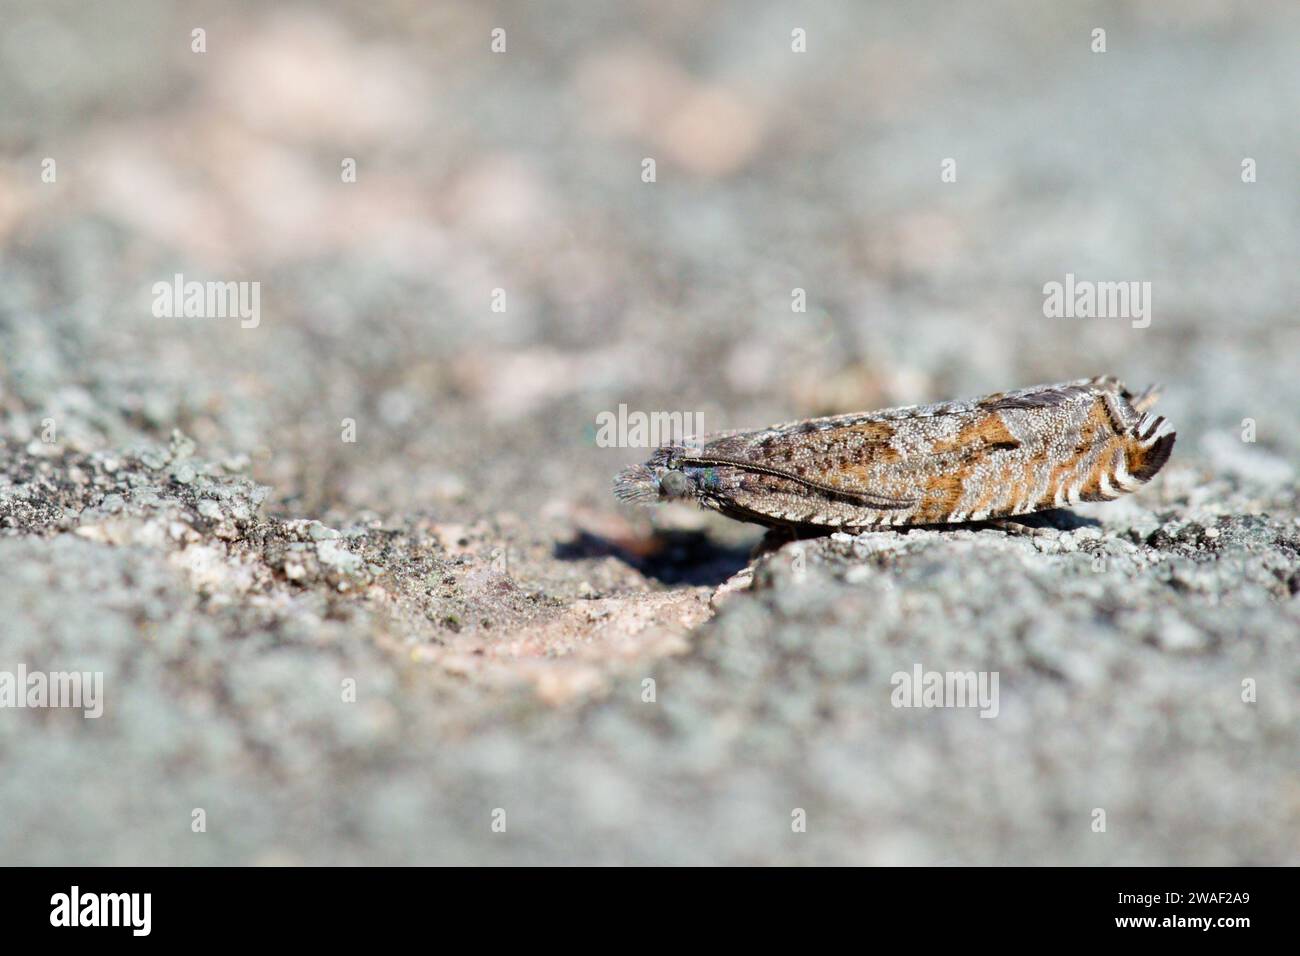 Leafrollermotte (Ancylis unguicella) Stockfoto